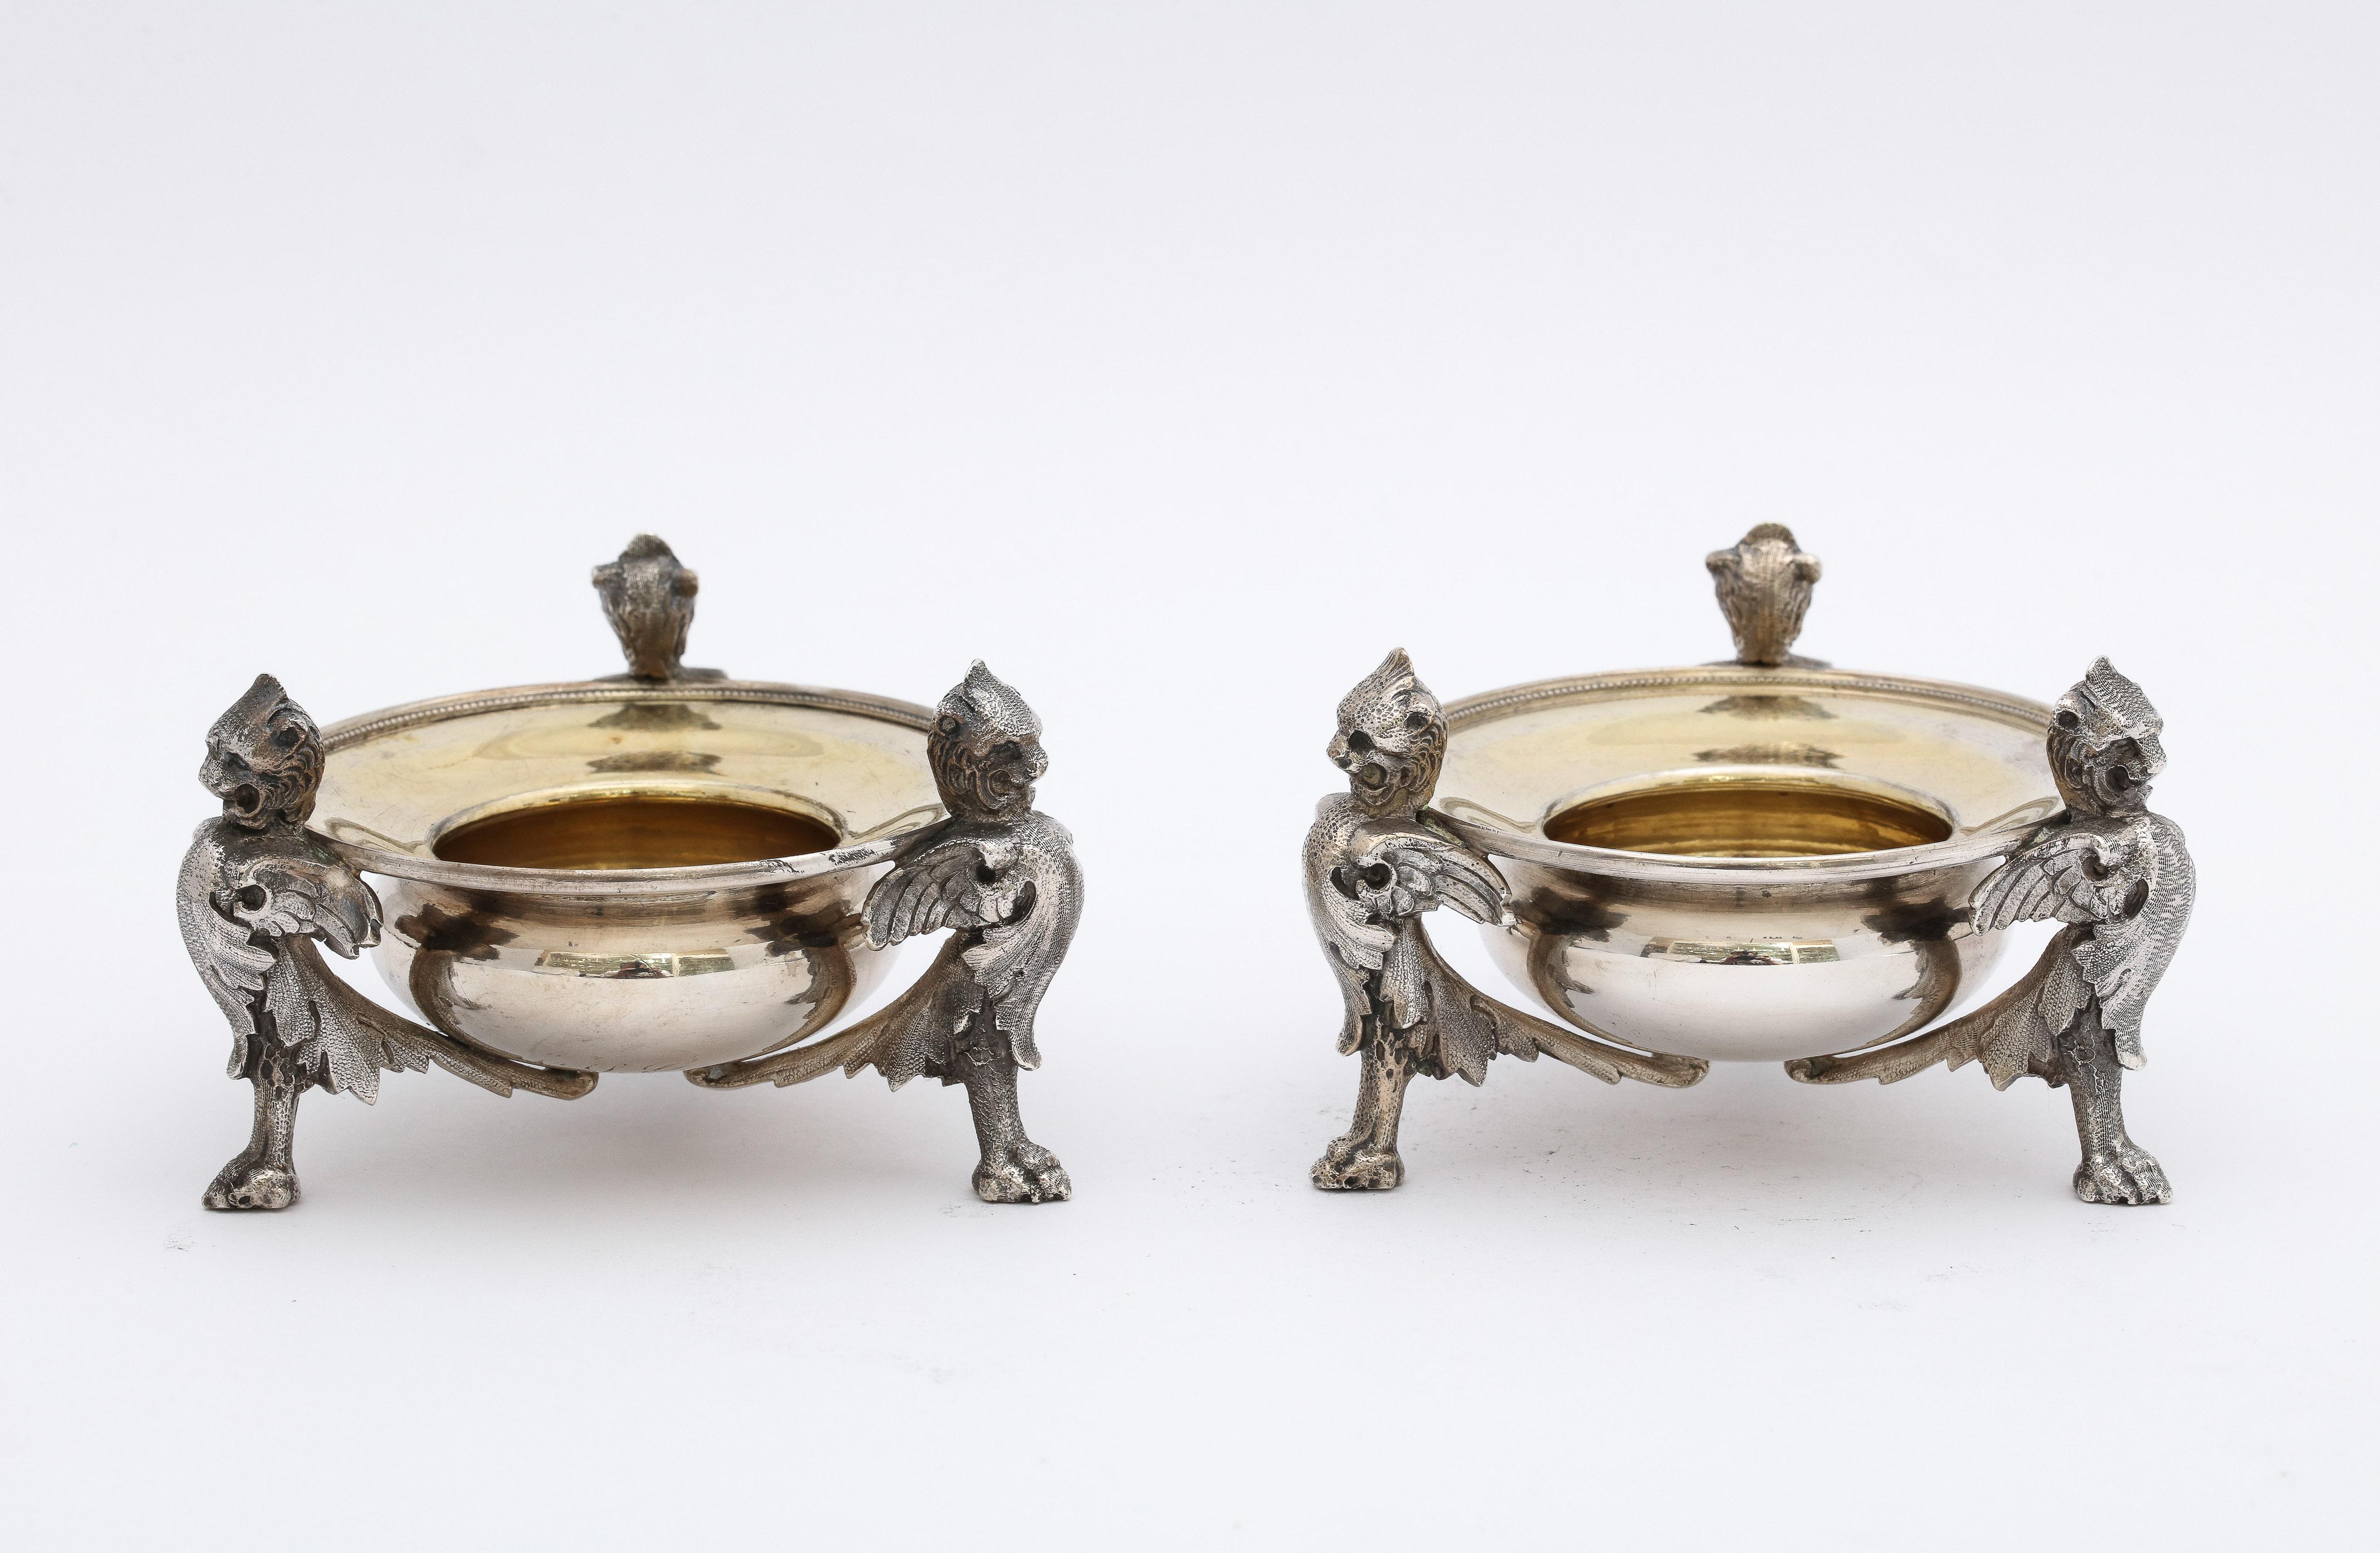 Pair of Neoclassical Style, parcel-gilt, Coin Silver (.900) footed salt cellars, American, Ca. 1850's (underside of each salt cellar is lightly engraved with  script initials - NSG - and the date 1859). The maker's mark for Gorham Mfg. Co. (located